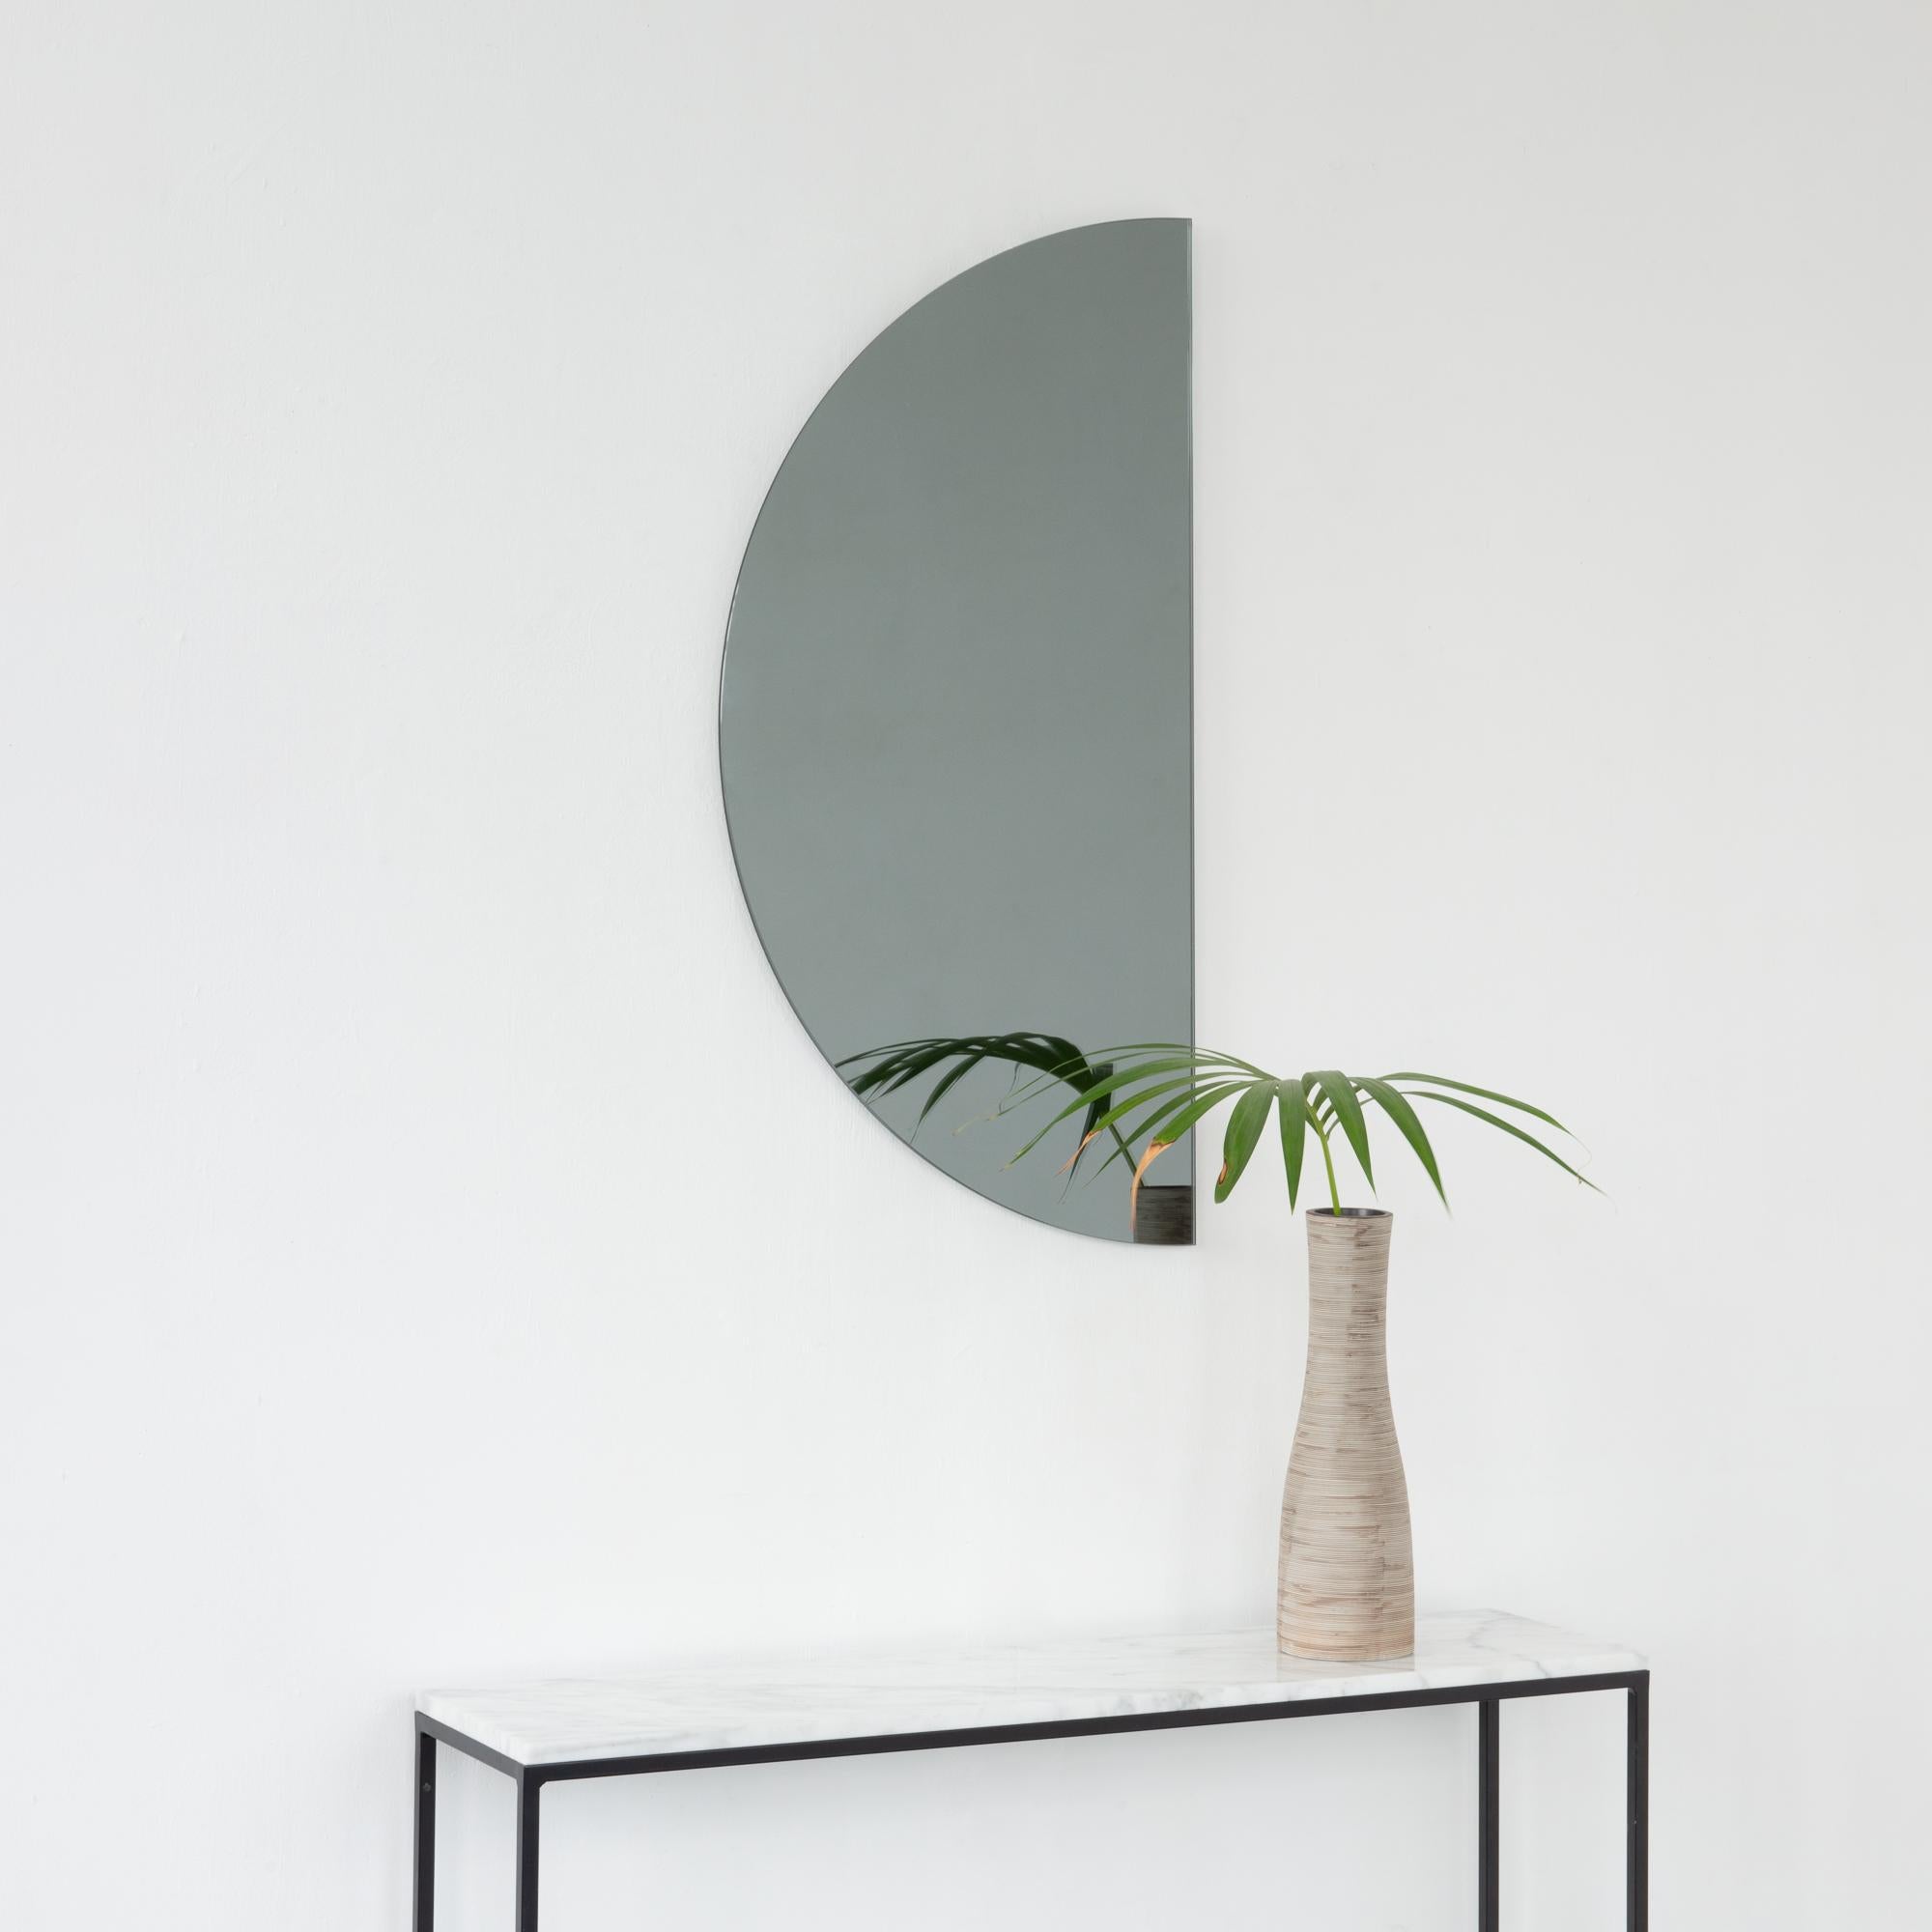 Minimalist half-moon Luna™ black tinted frameless mirror with a floating effect. Fitted with a quality and ingenious hanging system for a flexible installation in 4 different directions. Designed and made in London, UK. 

The backing has a brand new